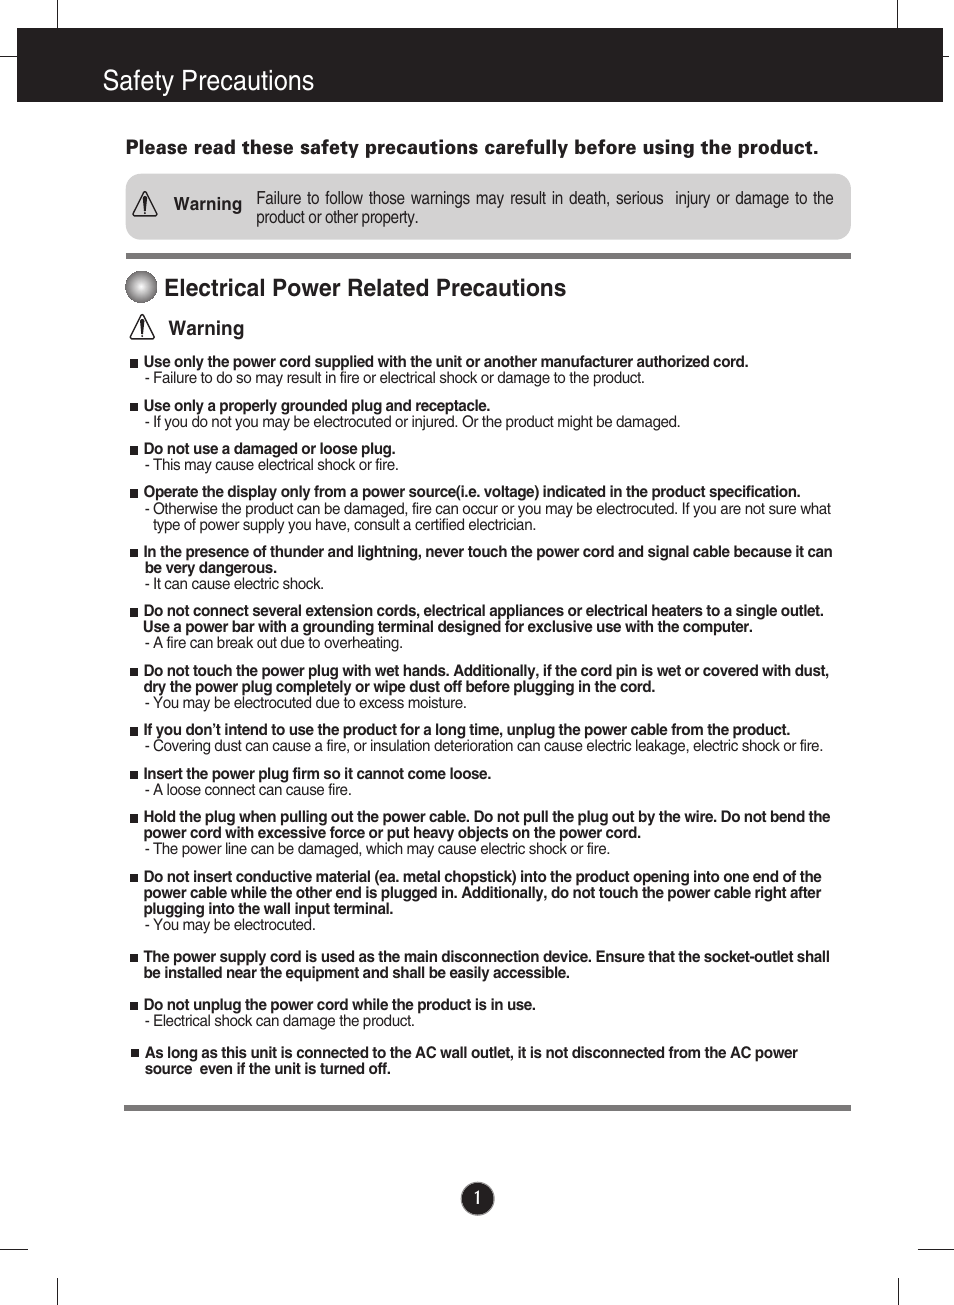 Safety precautions, Electrical power related precautions | LG IPS231B-BN User Manual | Page 2 / 31